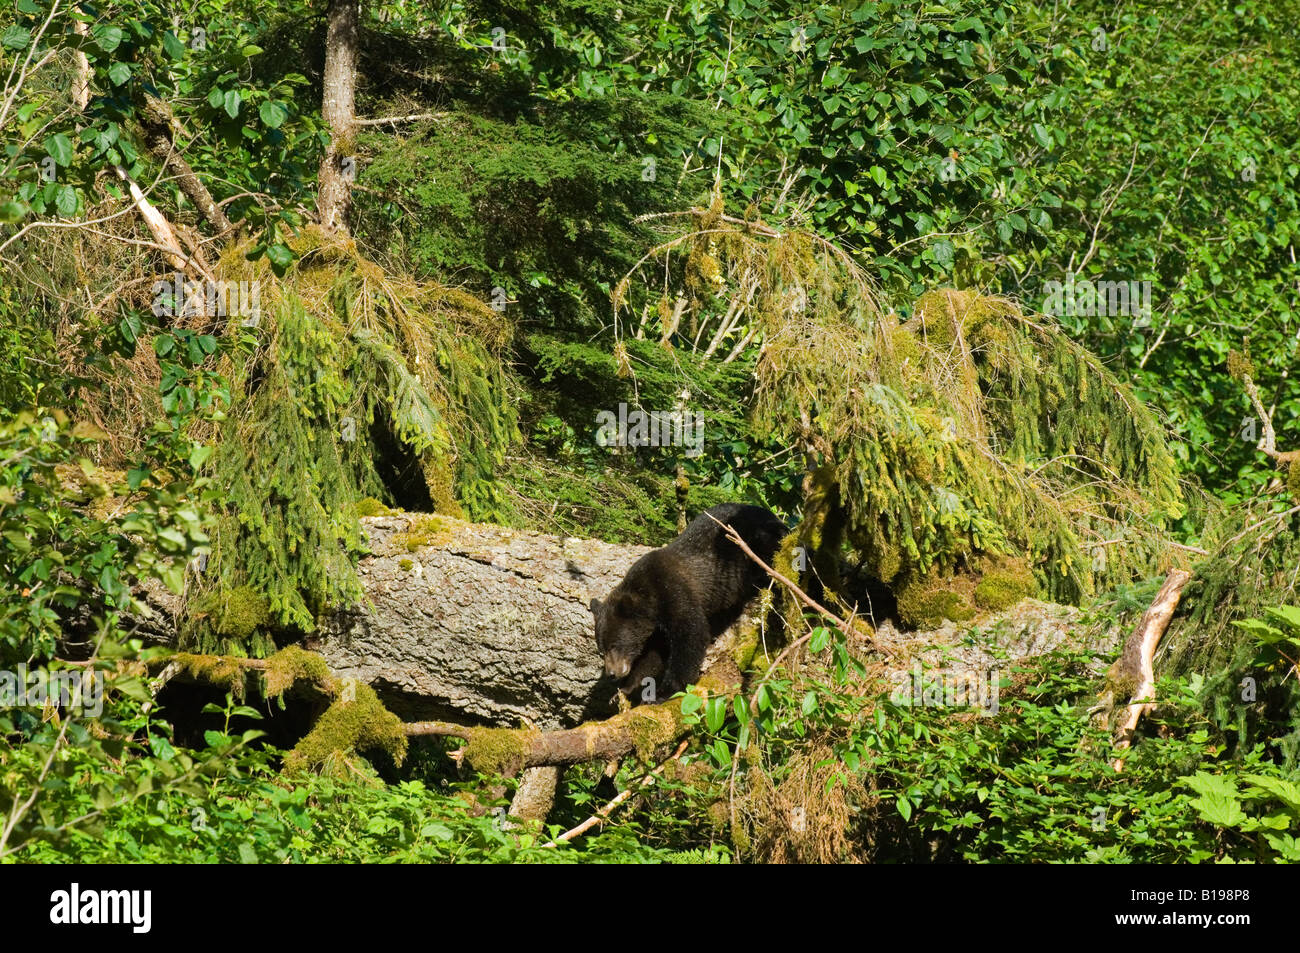 Grizzly Bear (Ursus arctos) Yearling trying to climb down from a large fallen tree. Tongass National Forest, Alaska, United Stat Stock Photo